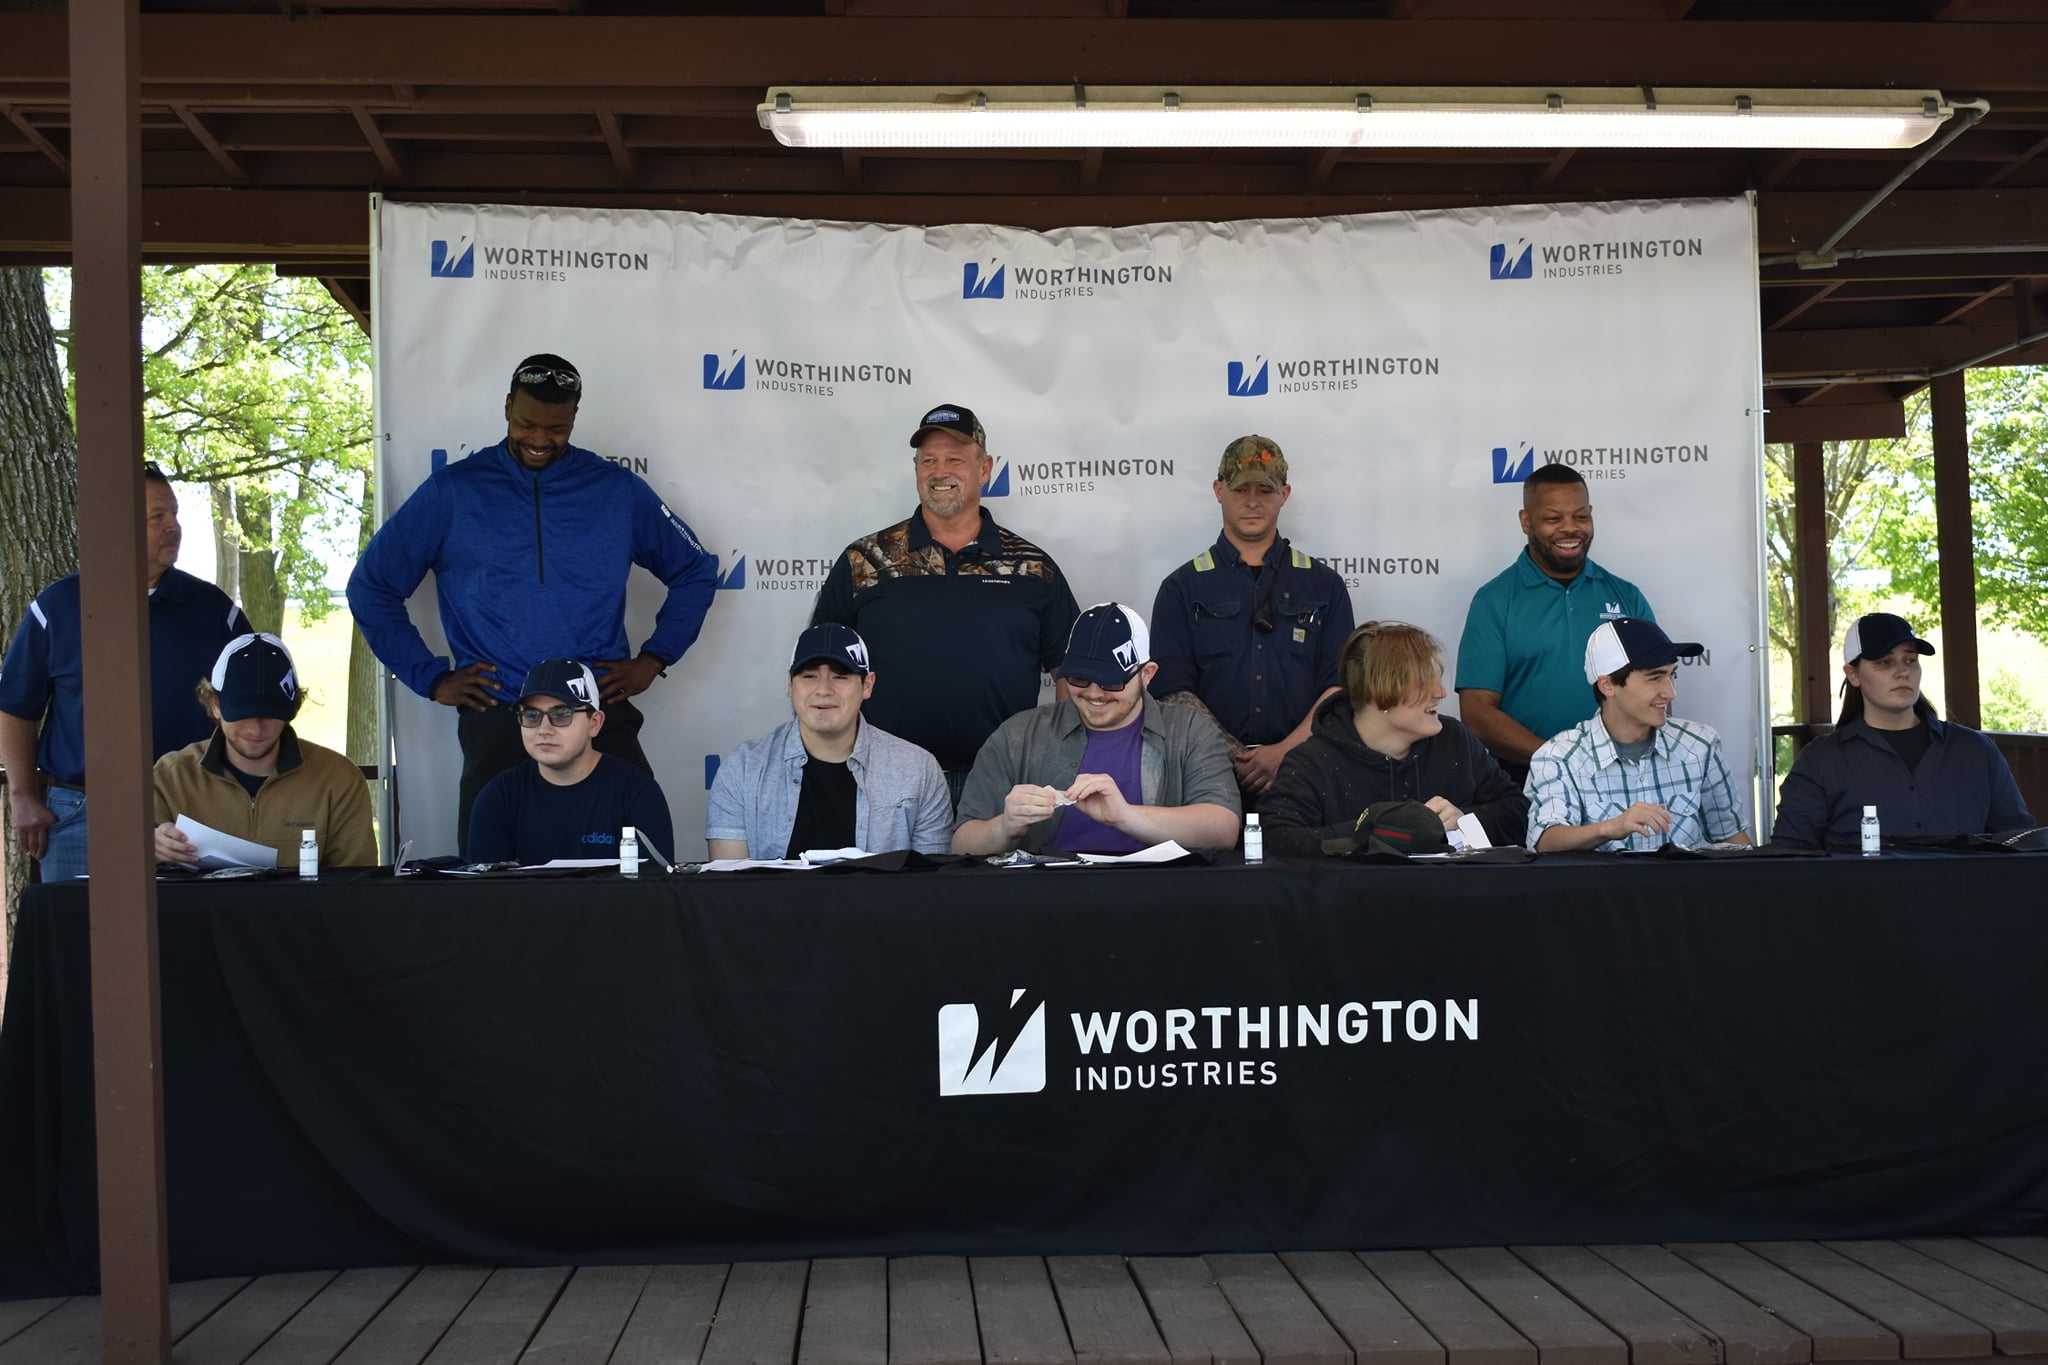 The Company’s Worthington Workforce Experience helps prepare interested high school seniors for roles in manufacturing, including on-the-job and classroom training. Here, this year’s program graduates are shown at our “signing day” where they were invited to join Worthington full-time upon graduation.